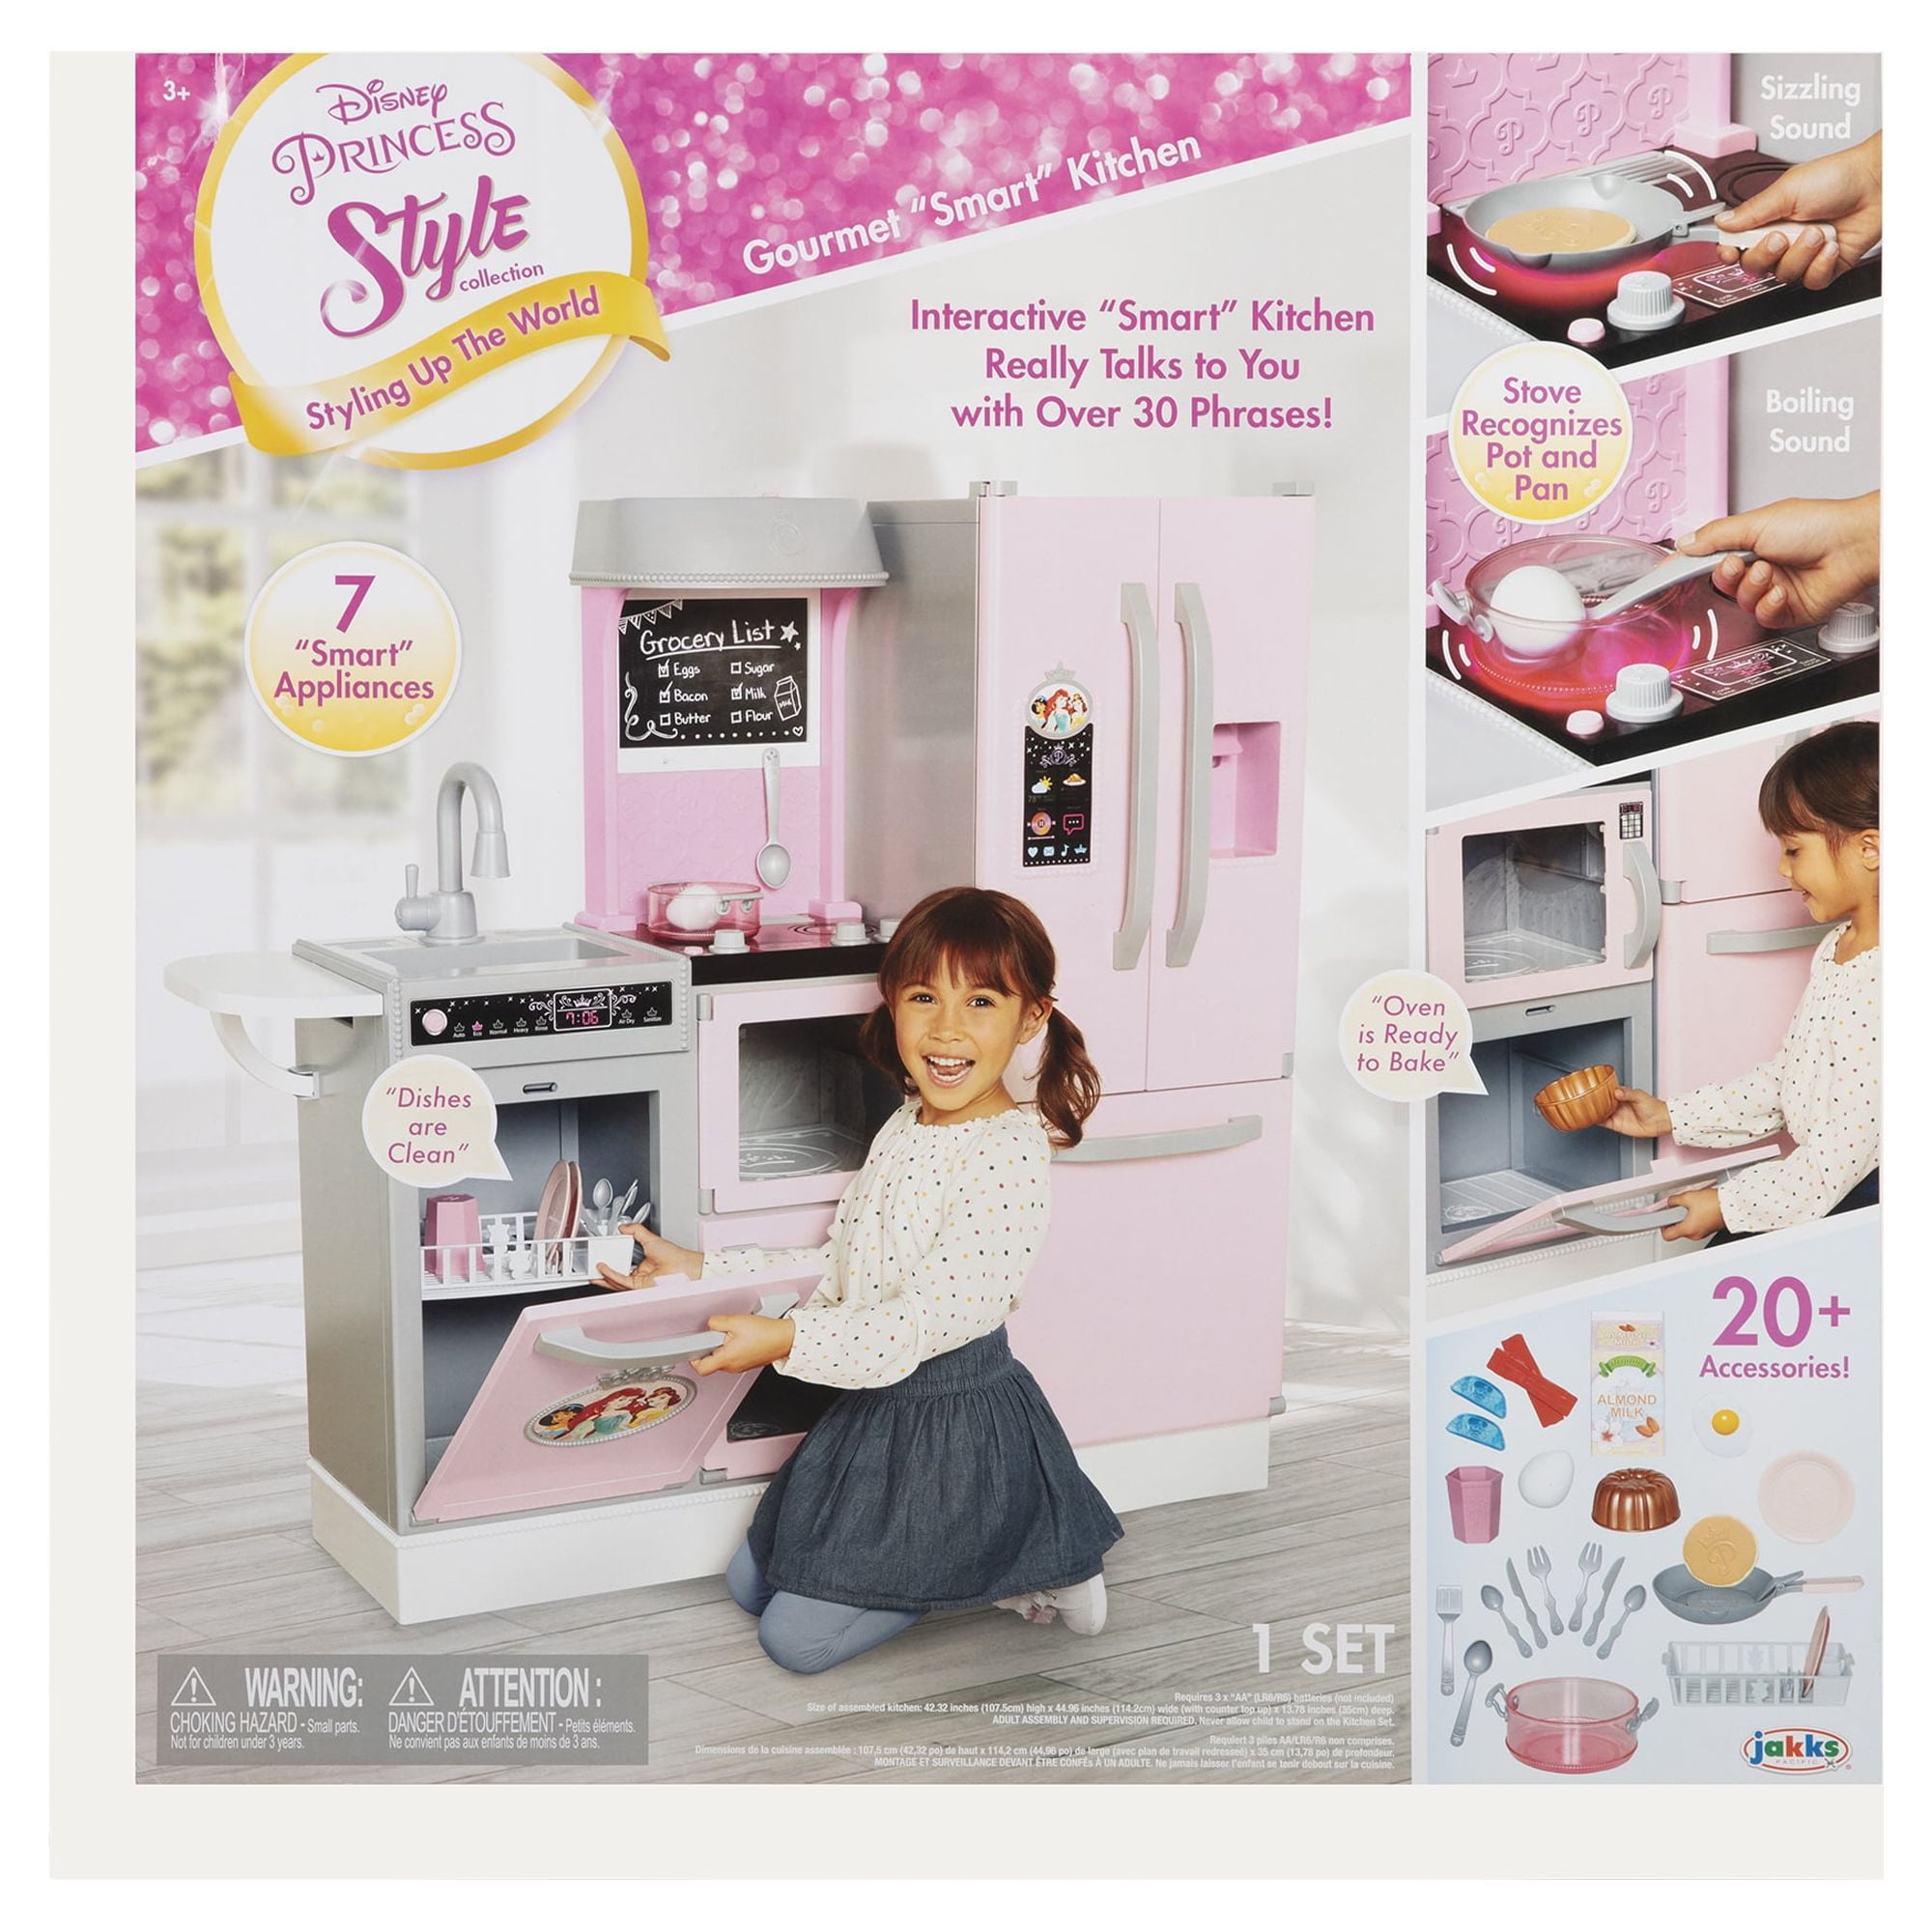 Disney Princess Style Collection Gourmet Smart Kitchen Includes Sounds,  Lights, 20 Peices